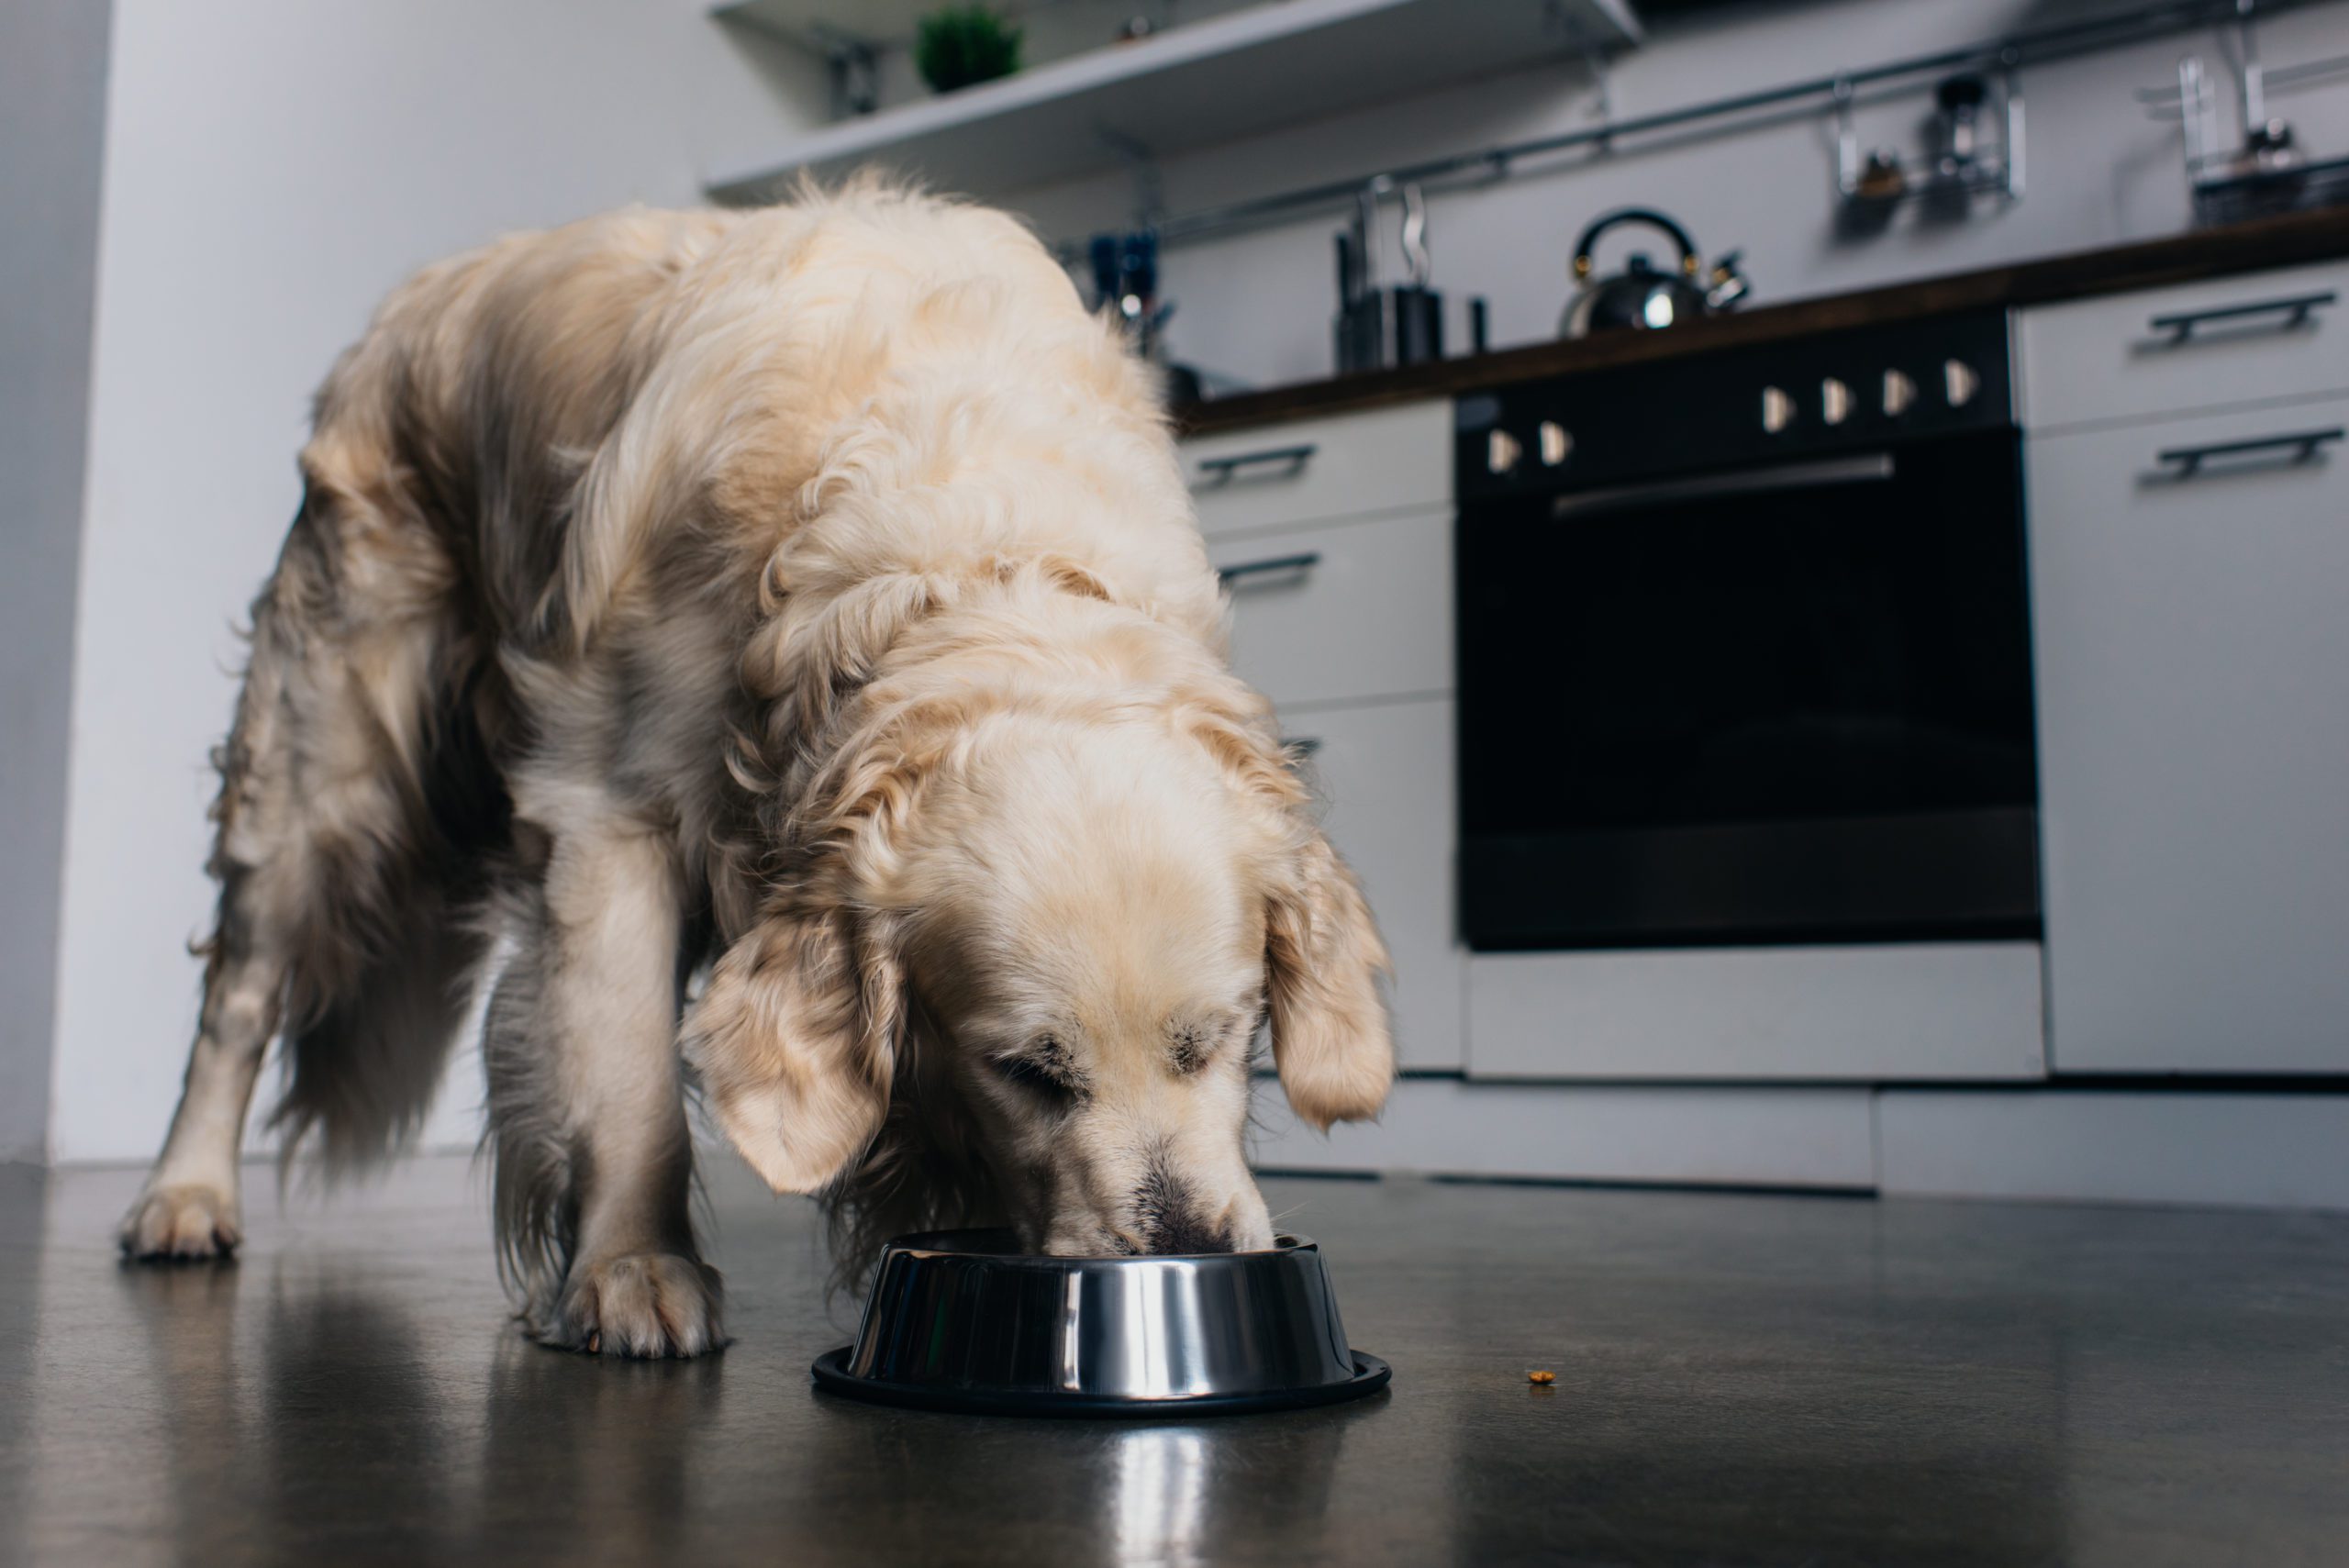 Adorable Golden Retriever Dog Eating Pet Food From Metal Bowl At Home